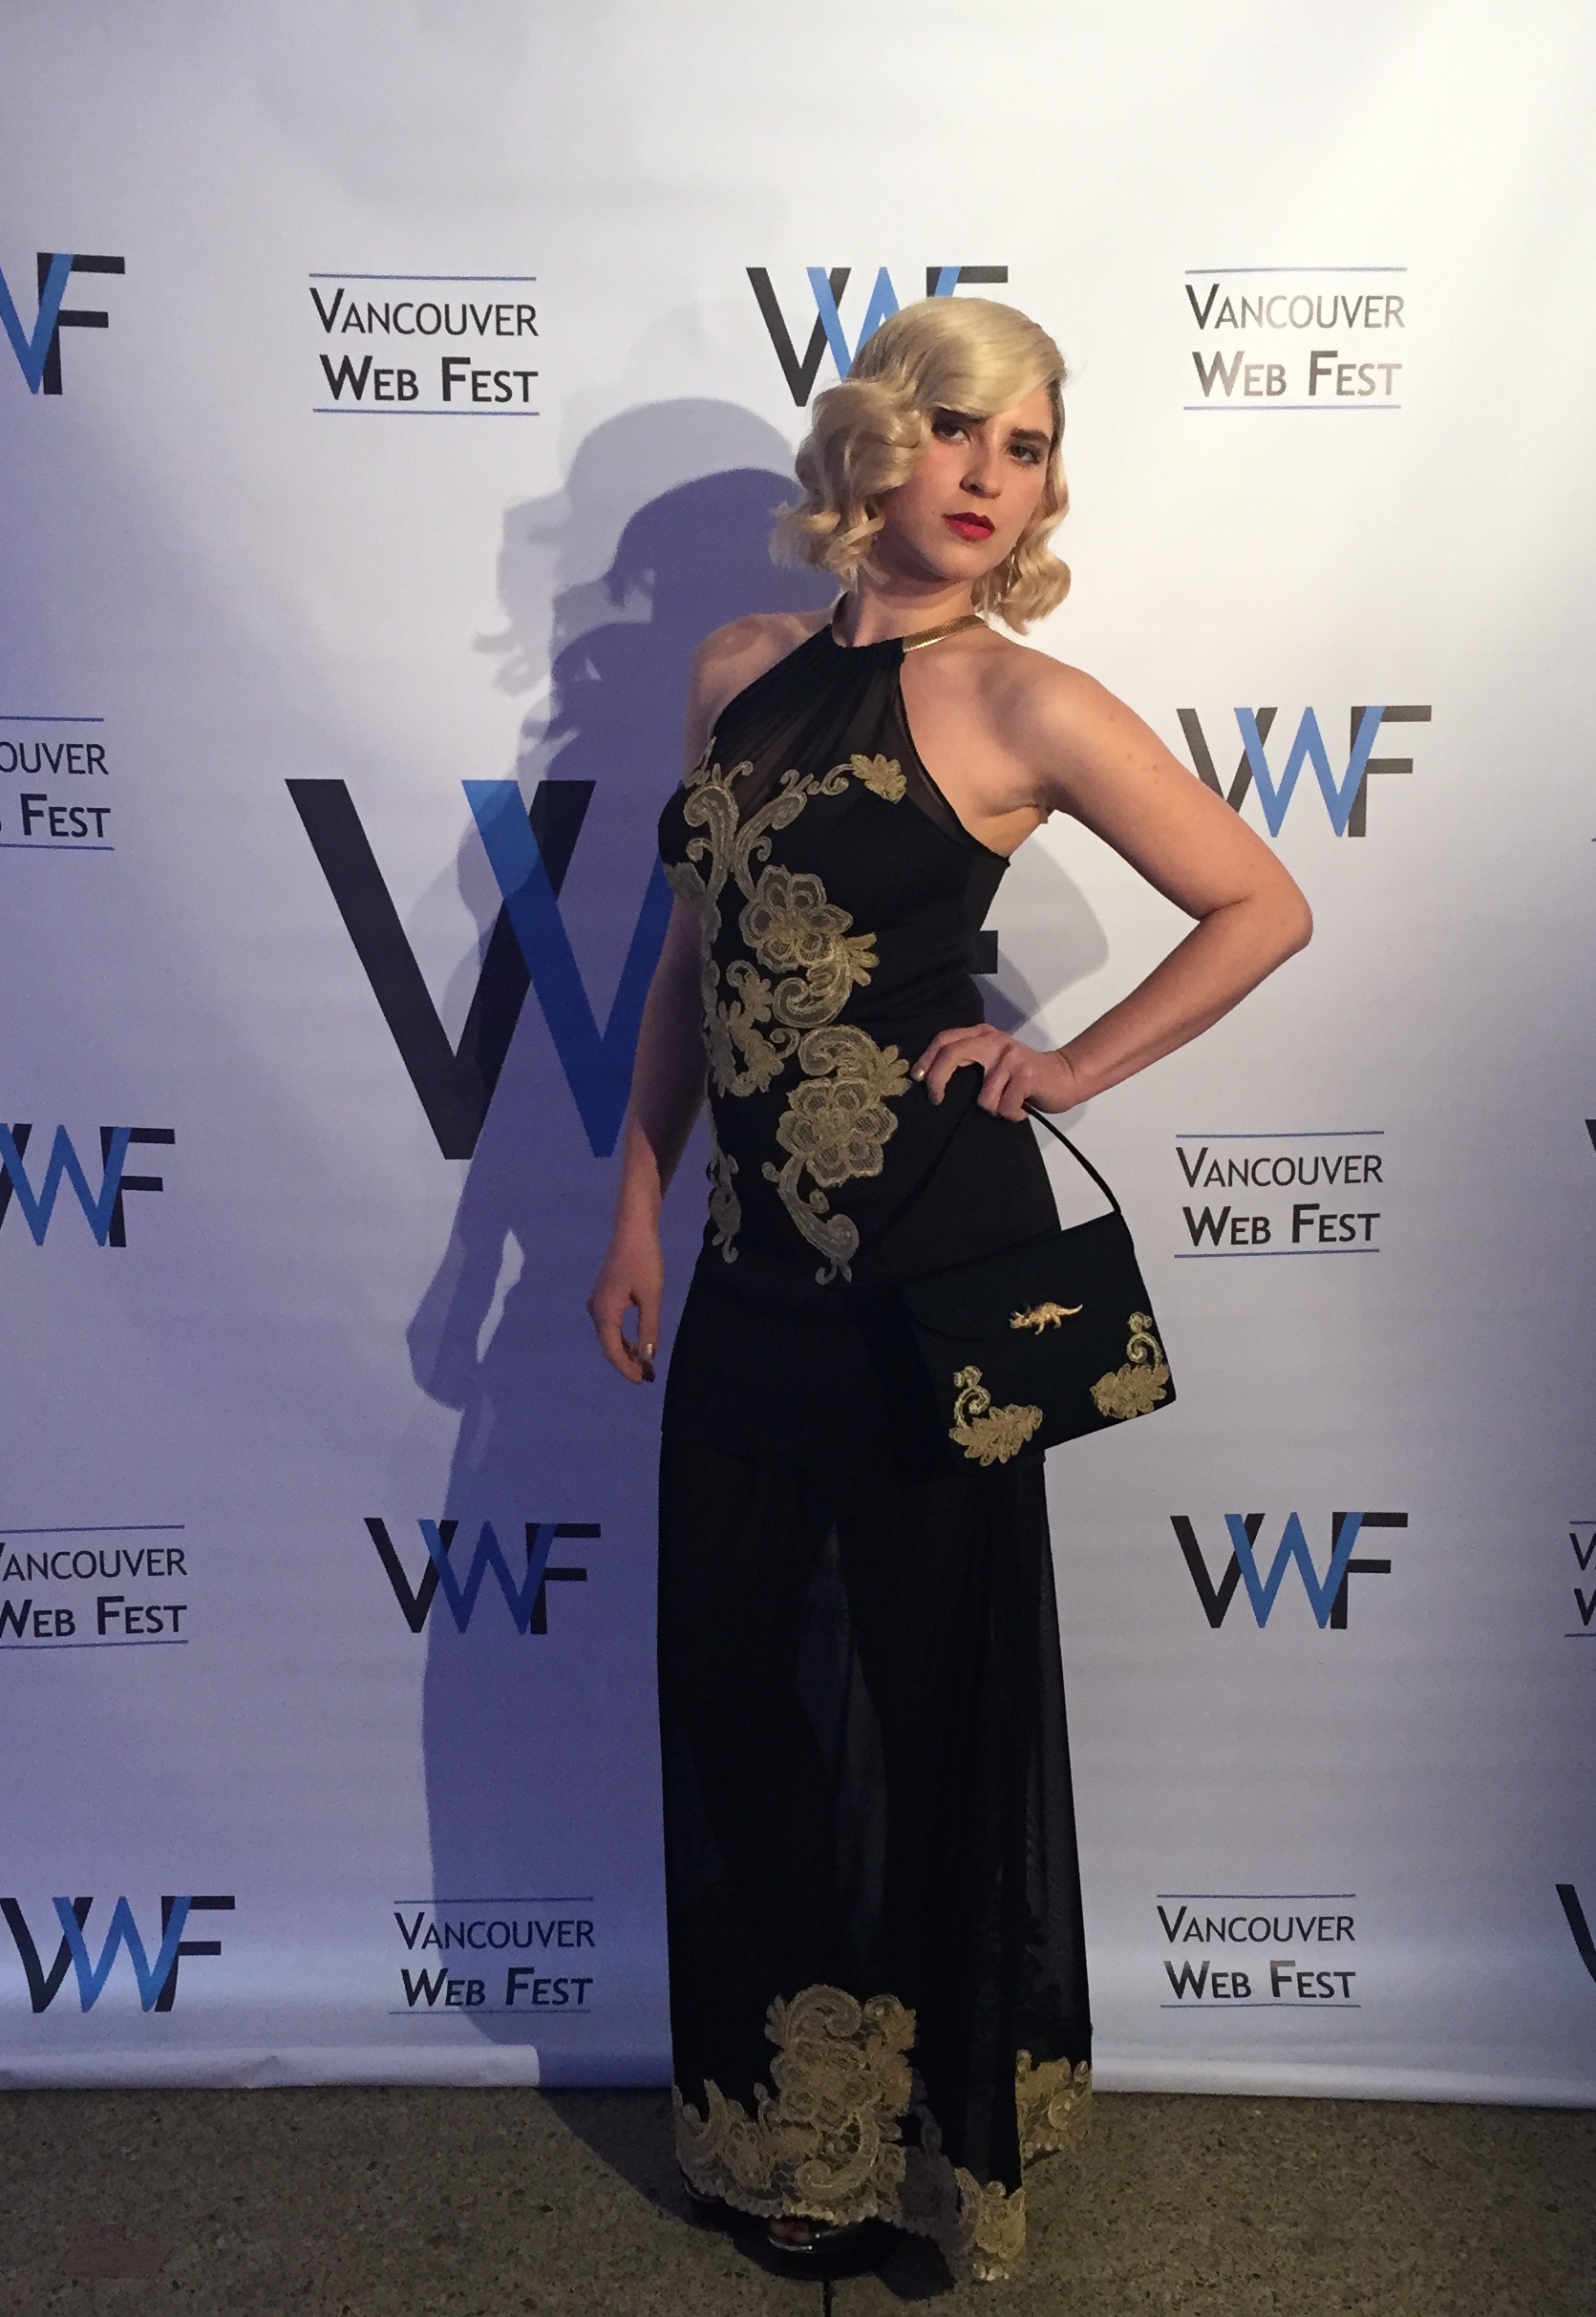 Marzy Hart, dress by House Of Correia, Vancouver Web Fest 2015